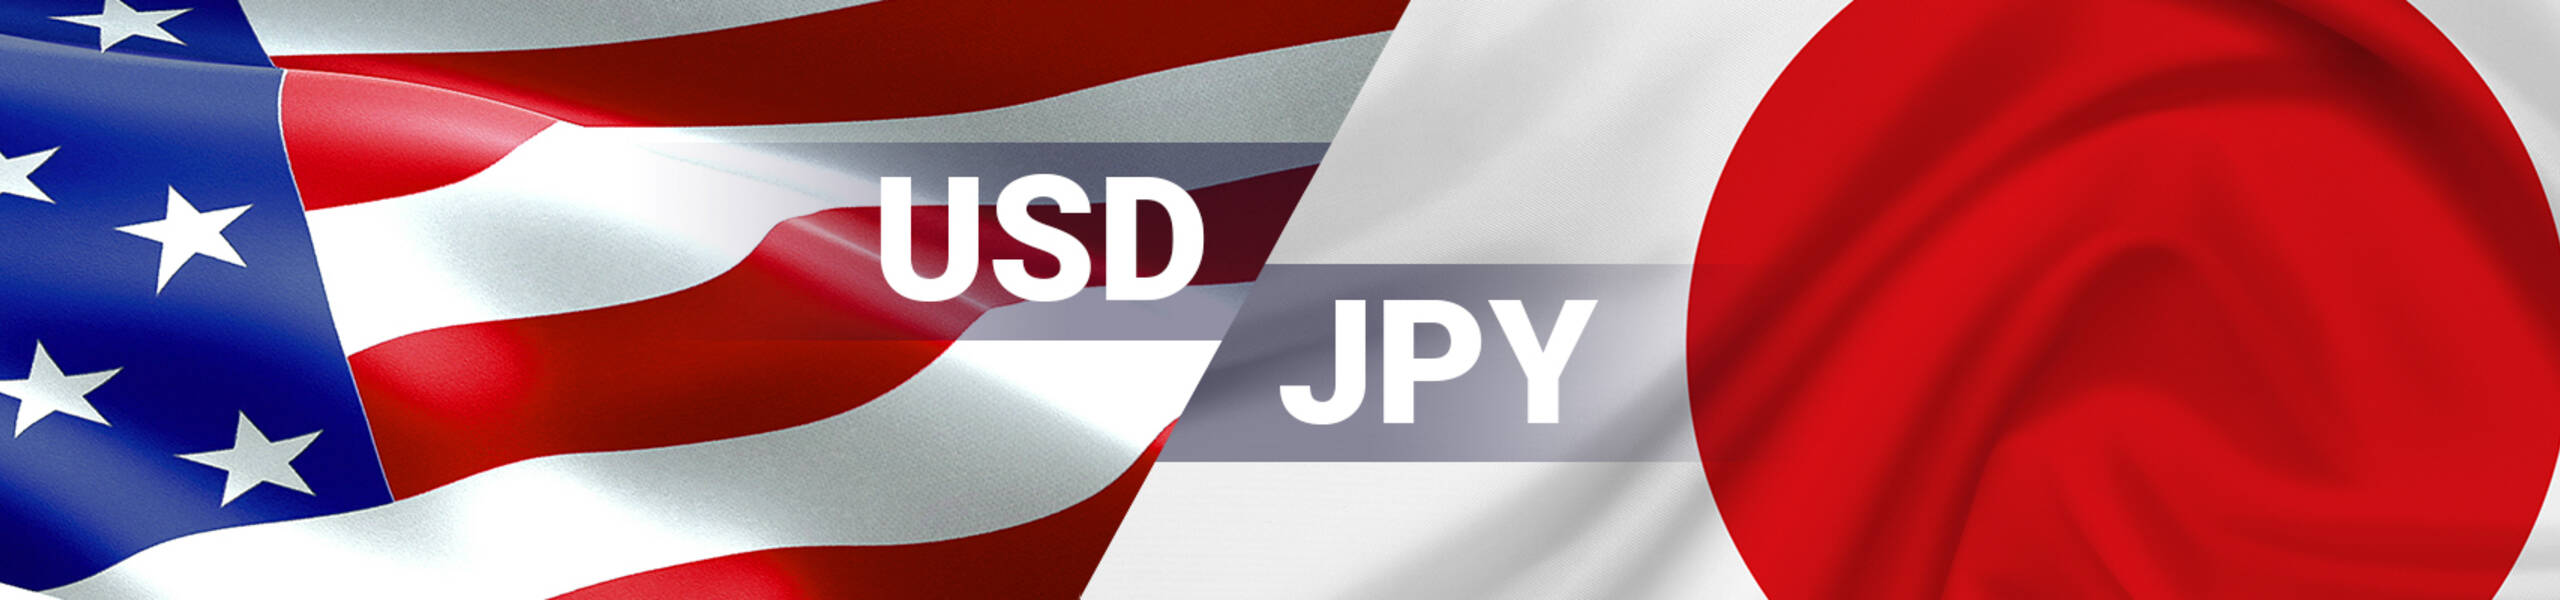 USD/JPY: Dollar going to April’s highs